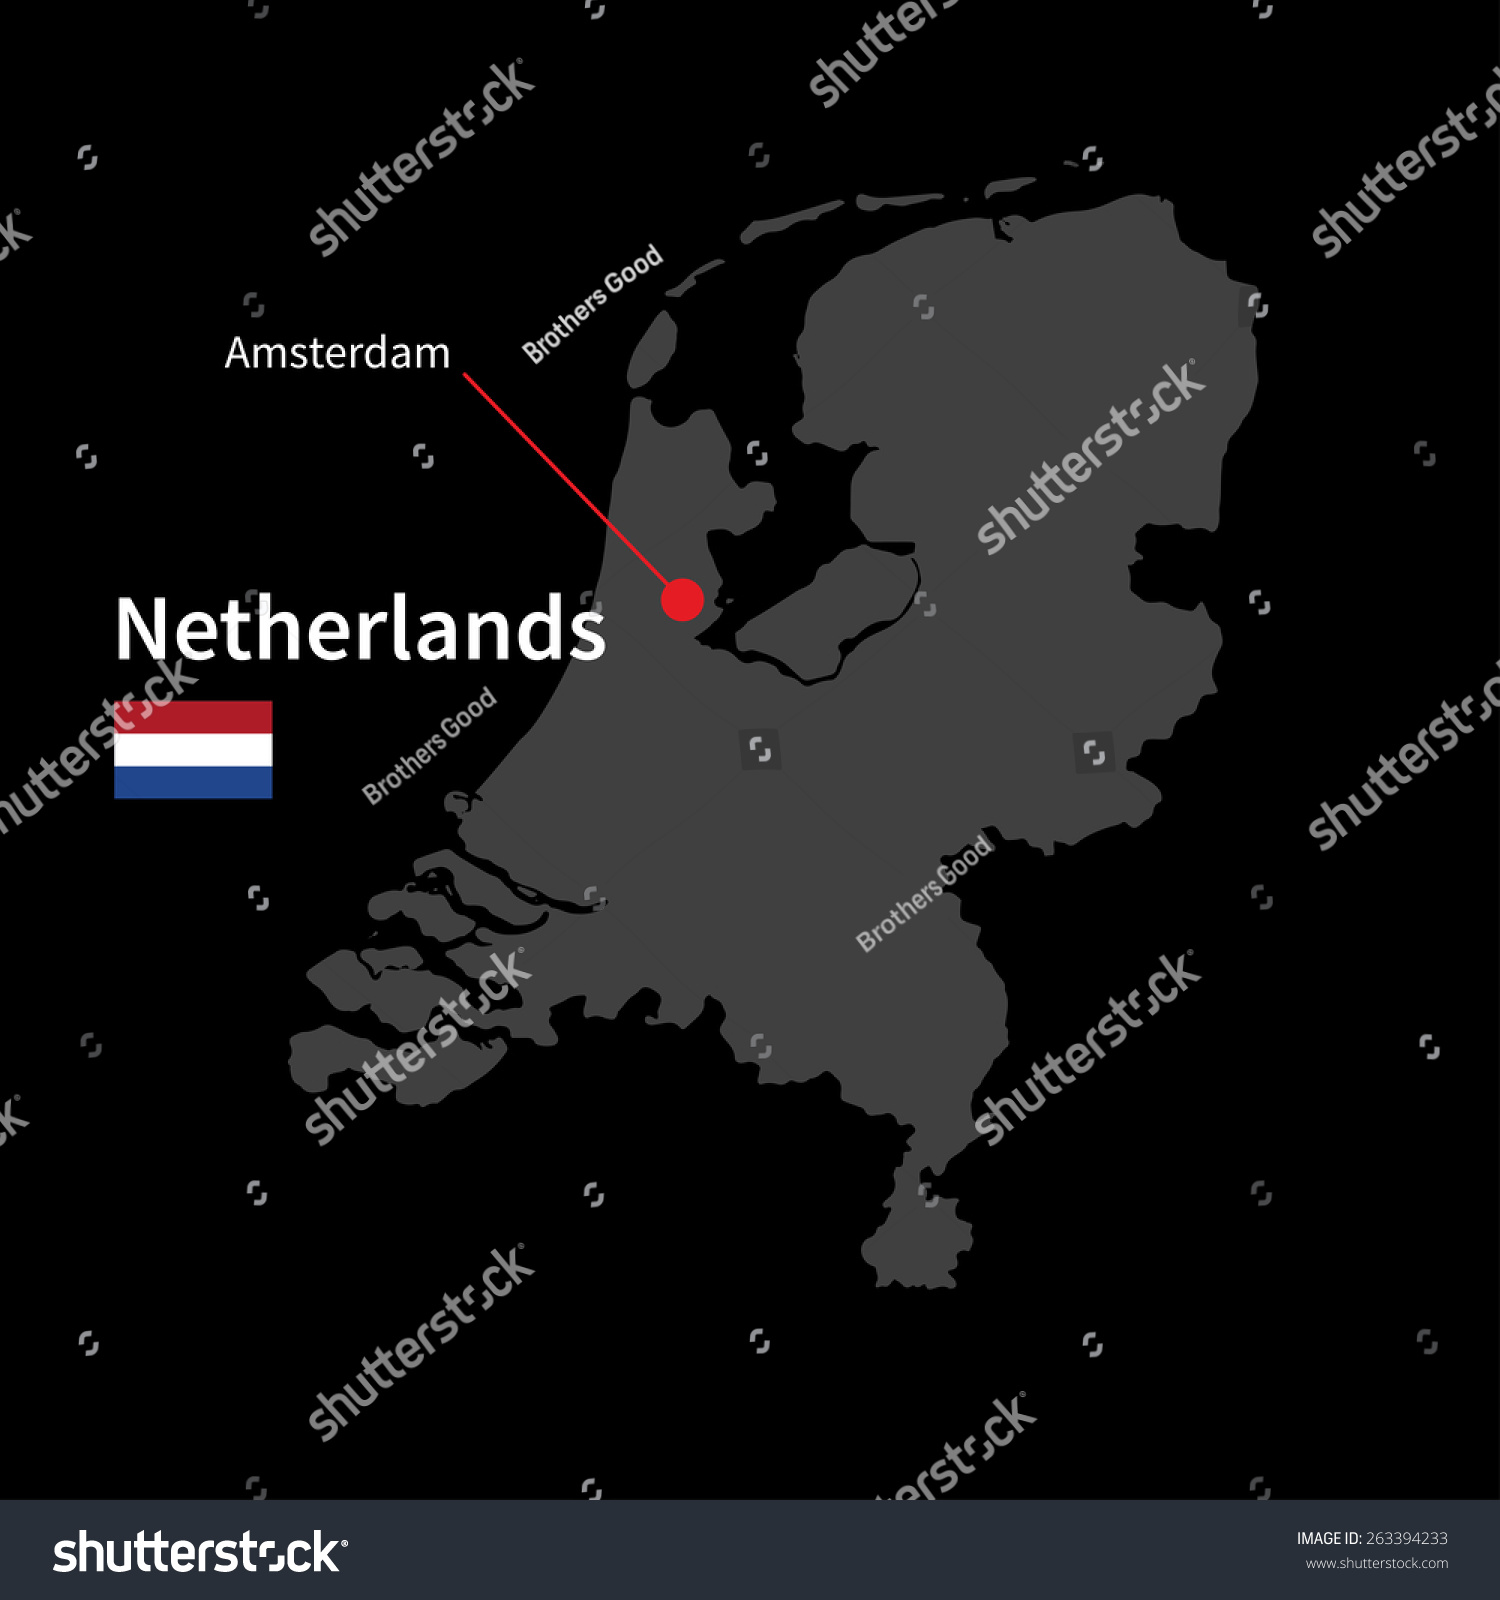 Detailed map of Netherlands and capital city Amsterdam with flag on black background #263394233